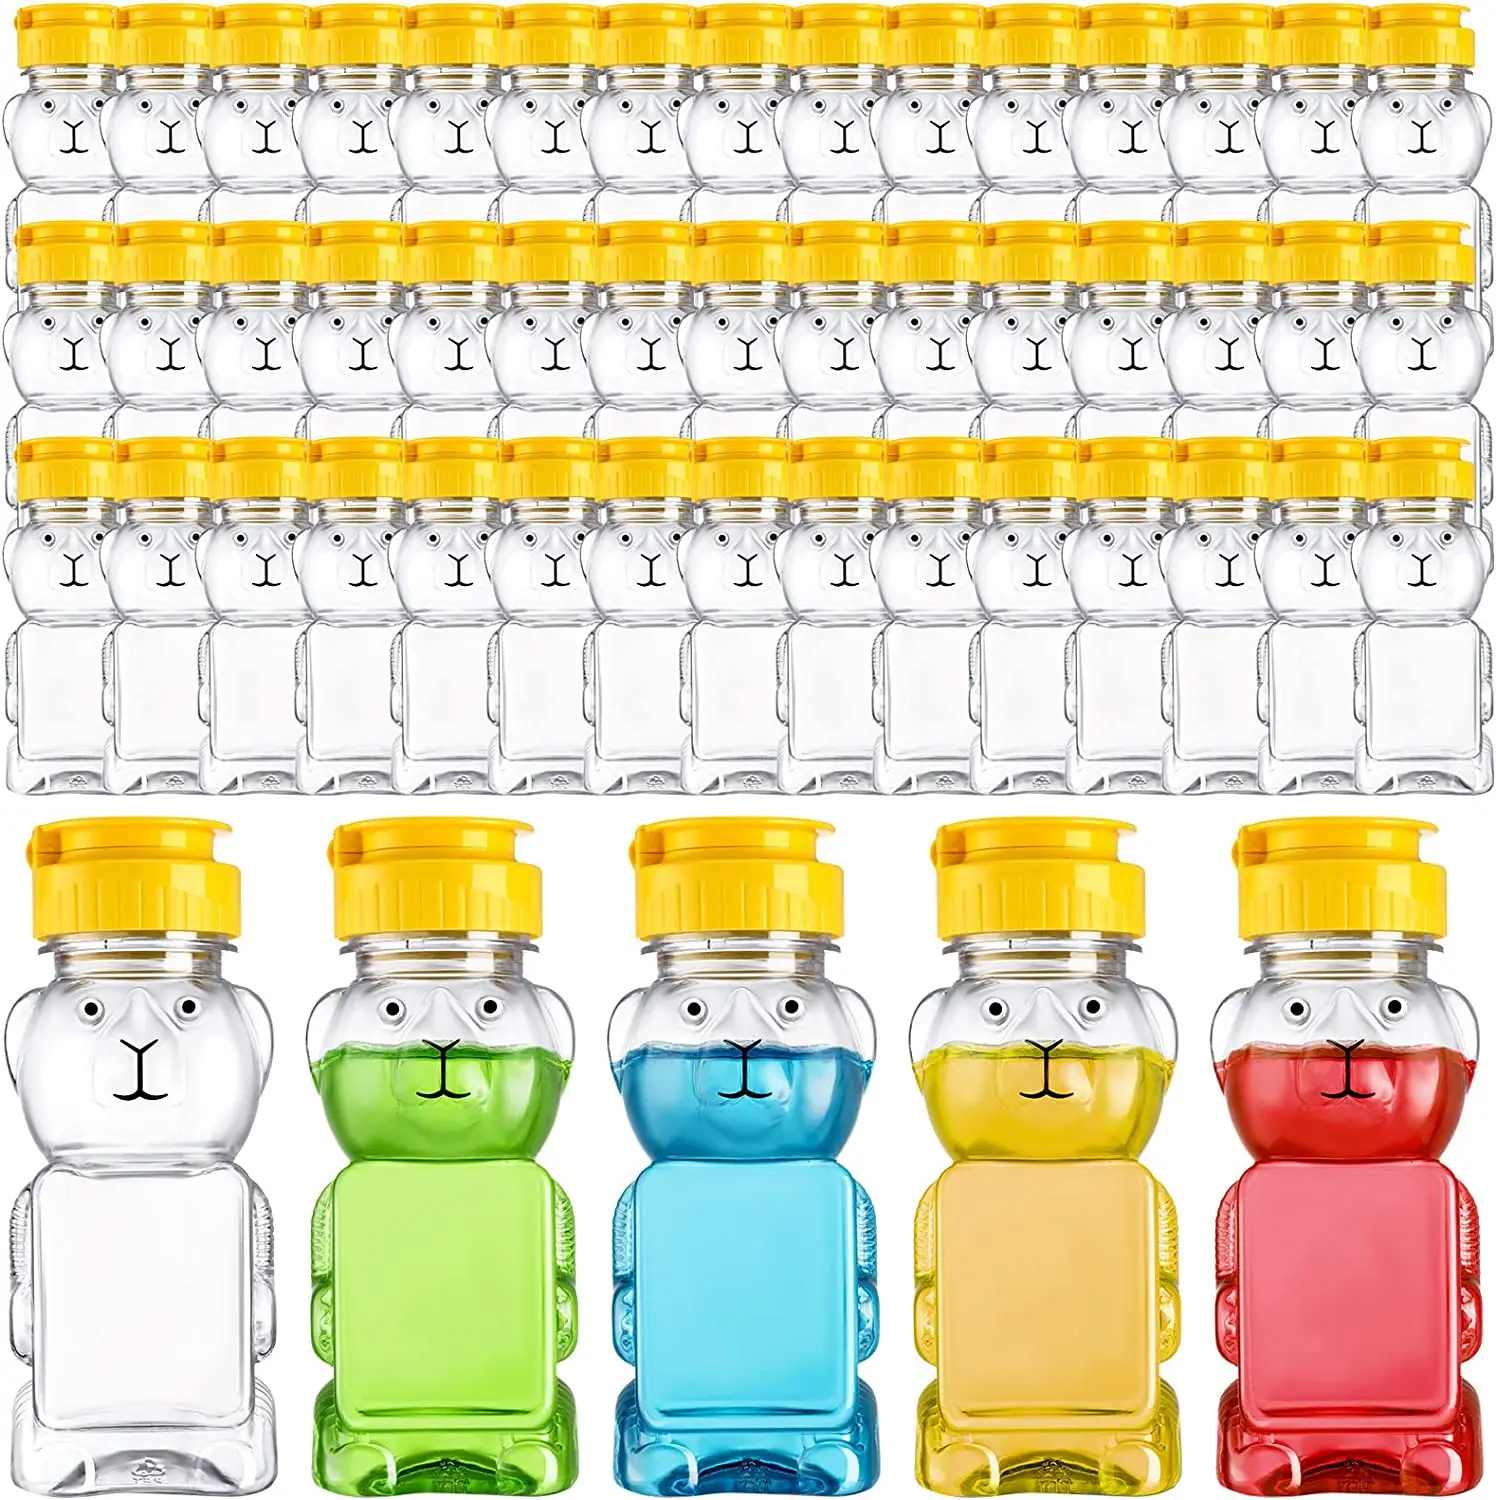 

36Pcs 6oz Plastic Bear Honey Squeeze Bottle with Flip Top Lid Clear Honey Containers Cup Juice Drinking Cup Storing Dispensing